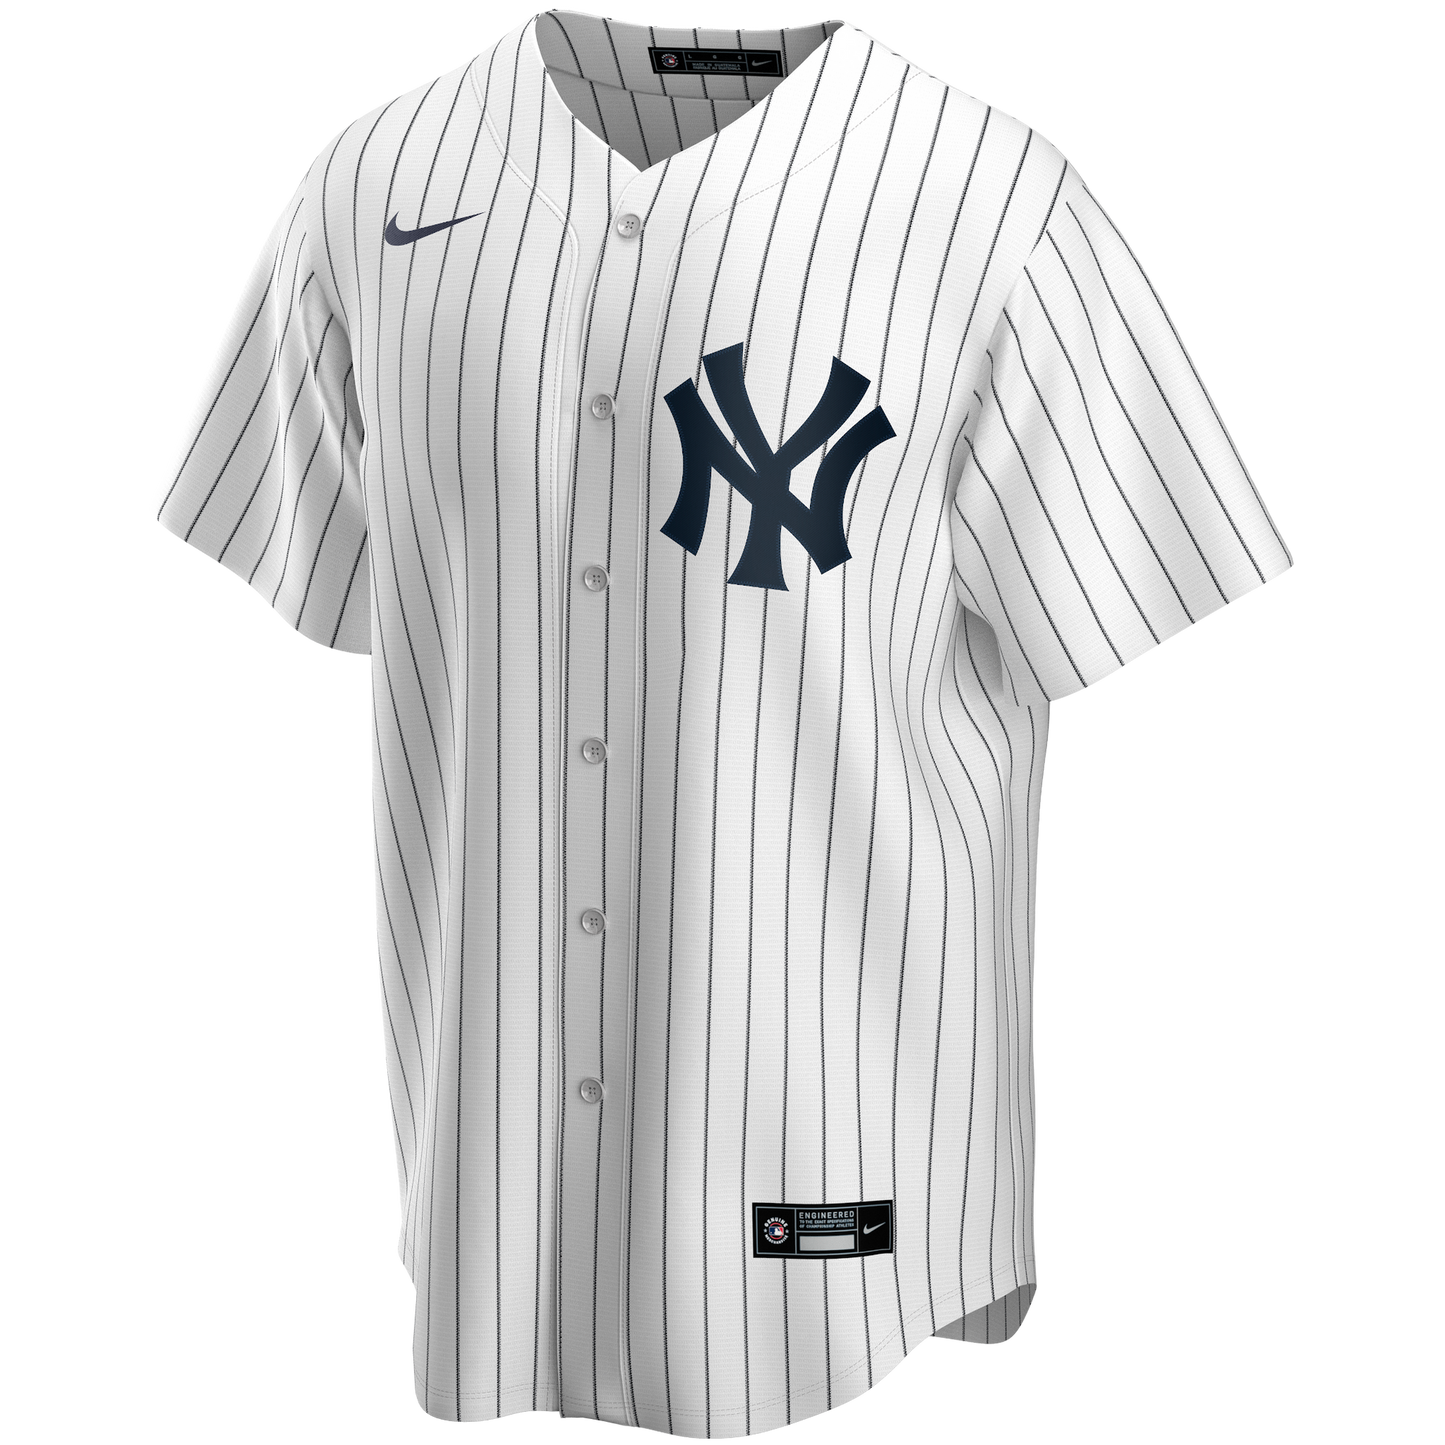 Men's Nike Deion Sanders White New York Yankees Home Official Replica Player Jersey